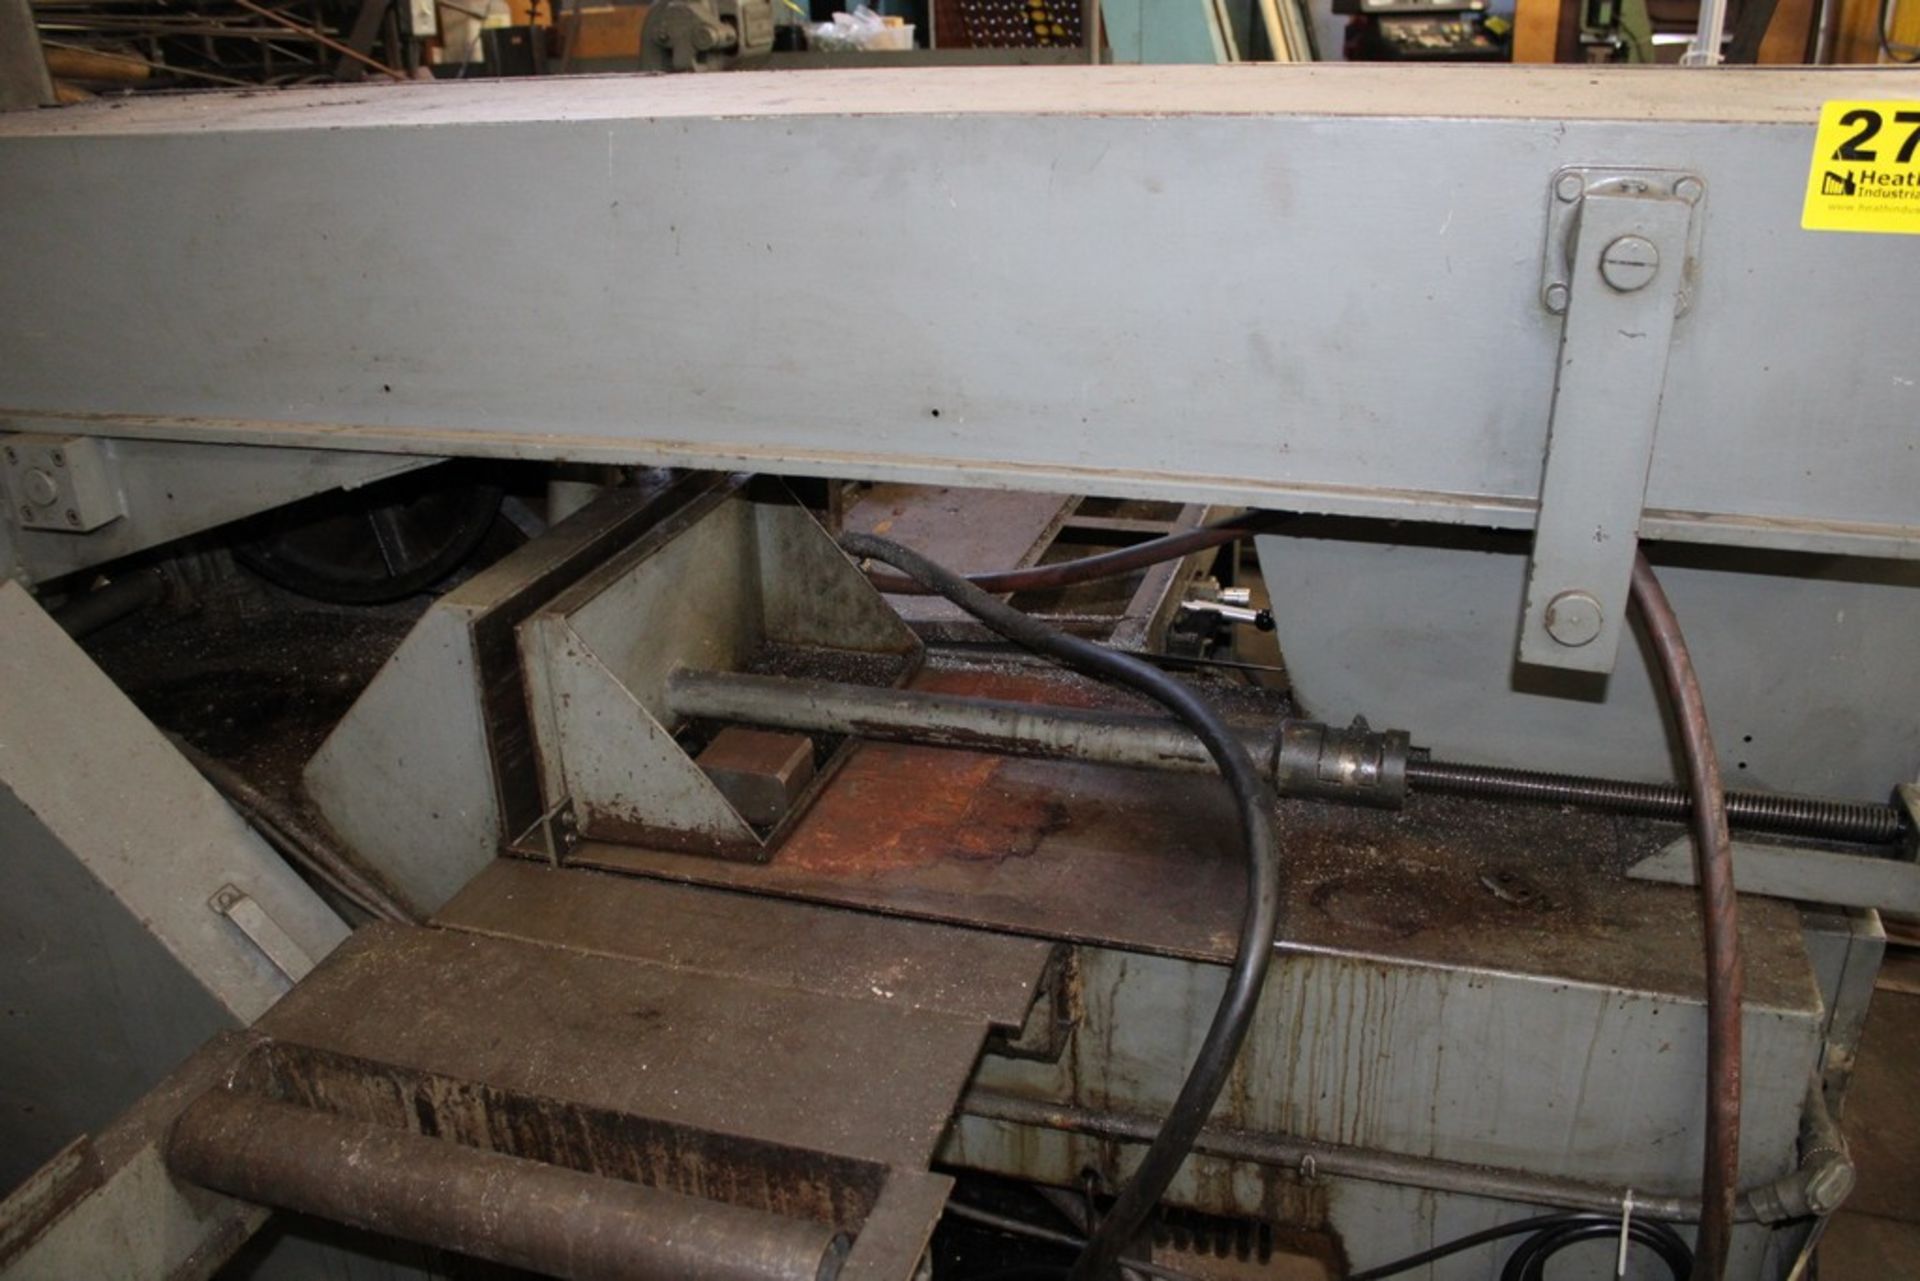 DOALL MODEL C-6 HORIZONTAL BAND SAW, S/N 207-62253, HYDRAULIC TABLE STOP, ROLLER CONVEYOR - Image 3 of 6